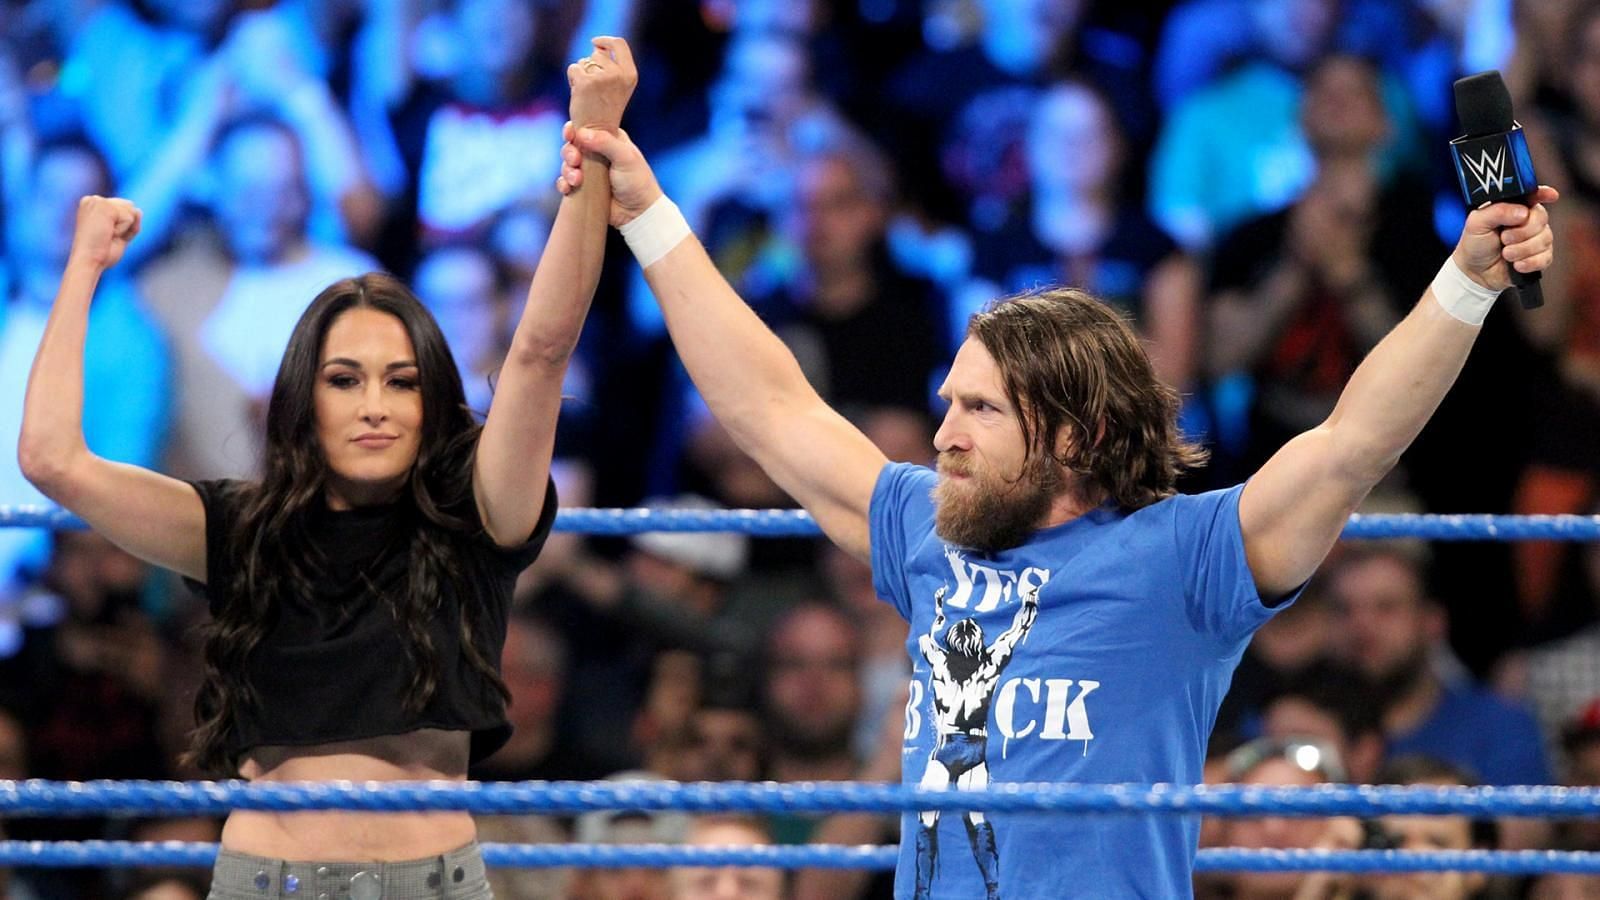 The couple during their shared WWE appearance in 2018.